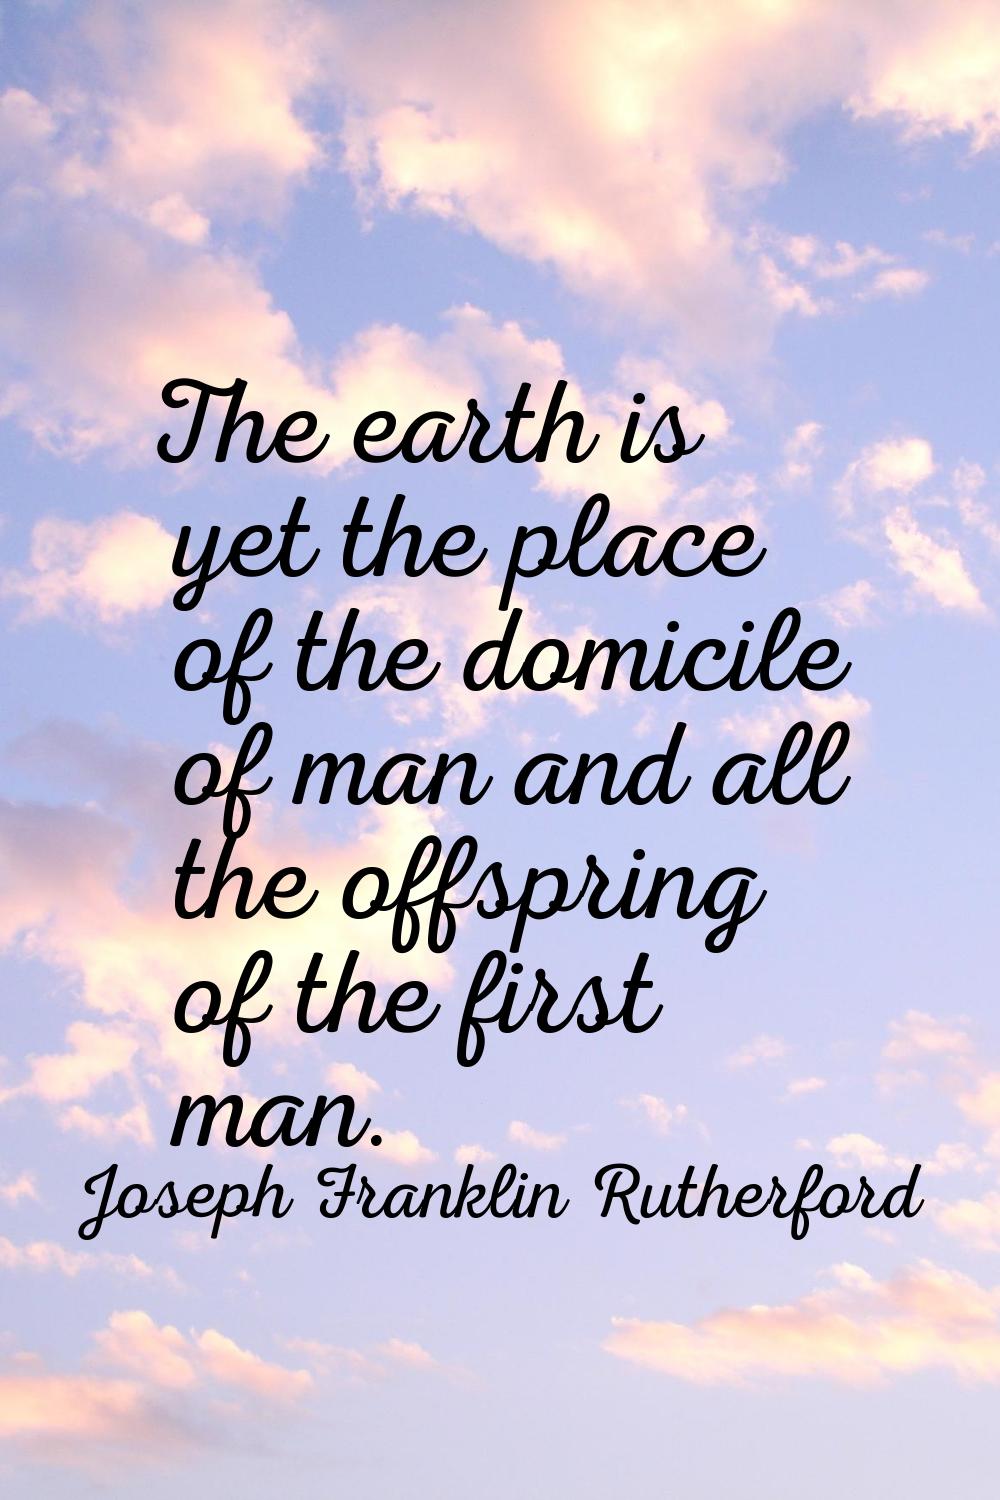 The earth is yet the place of the domicile of man and all the offspring of the first man.